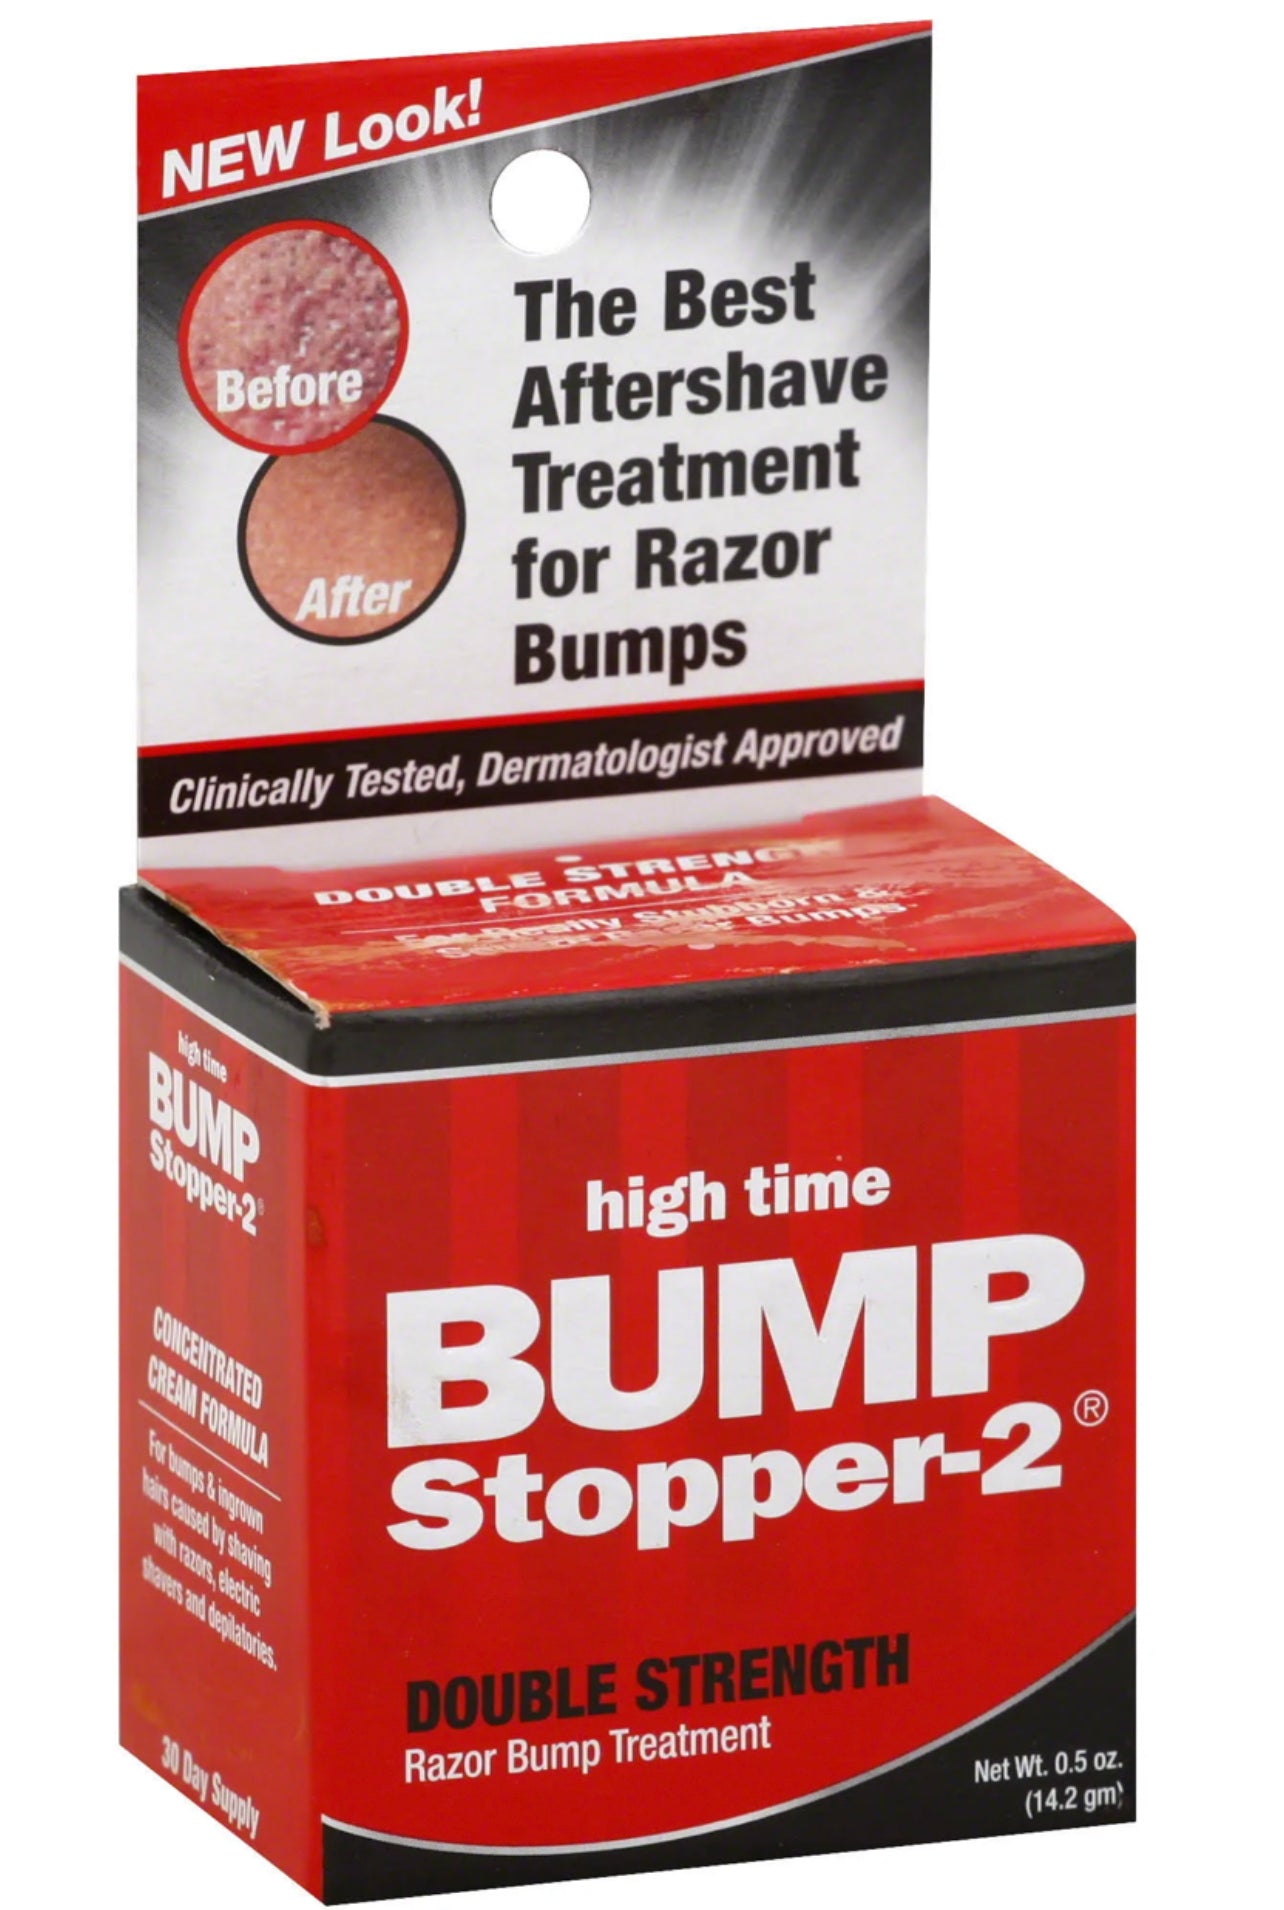 High Time Bumb Stopper-2 - Tam's Natural Solutions